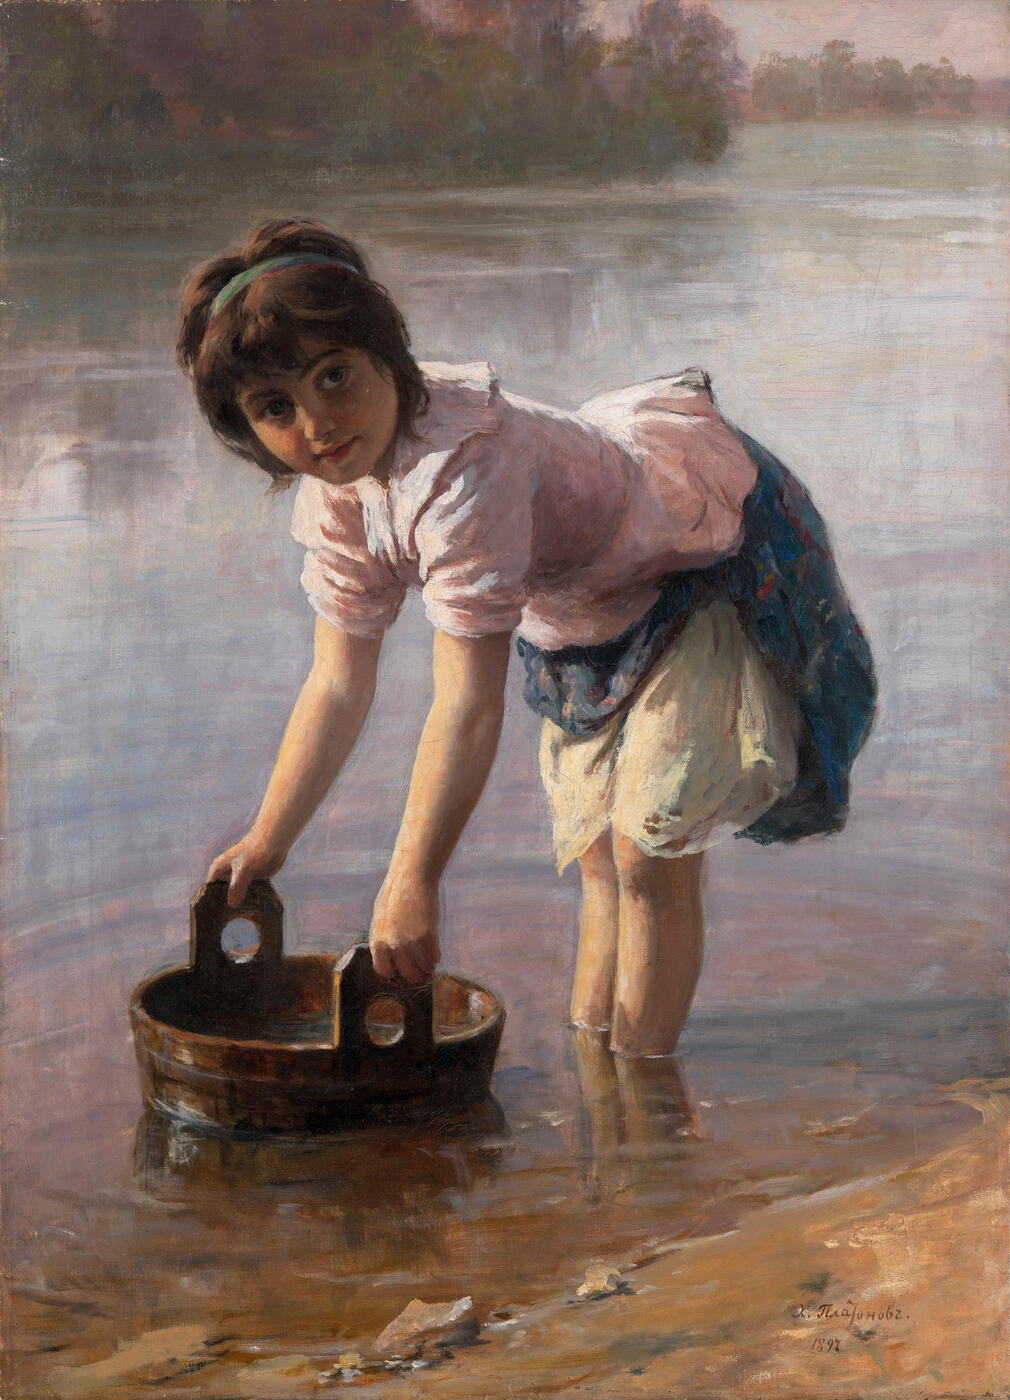 Girl Doing Laundry in a River